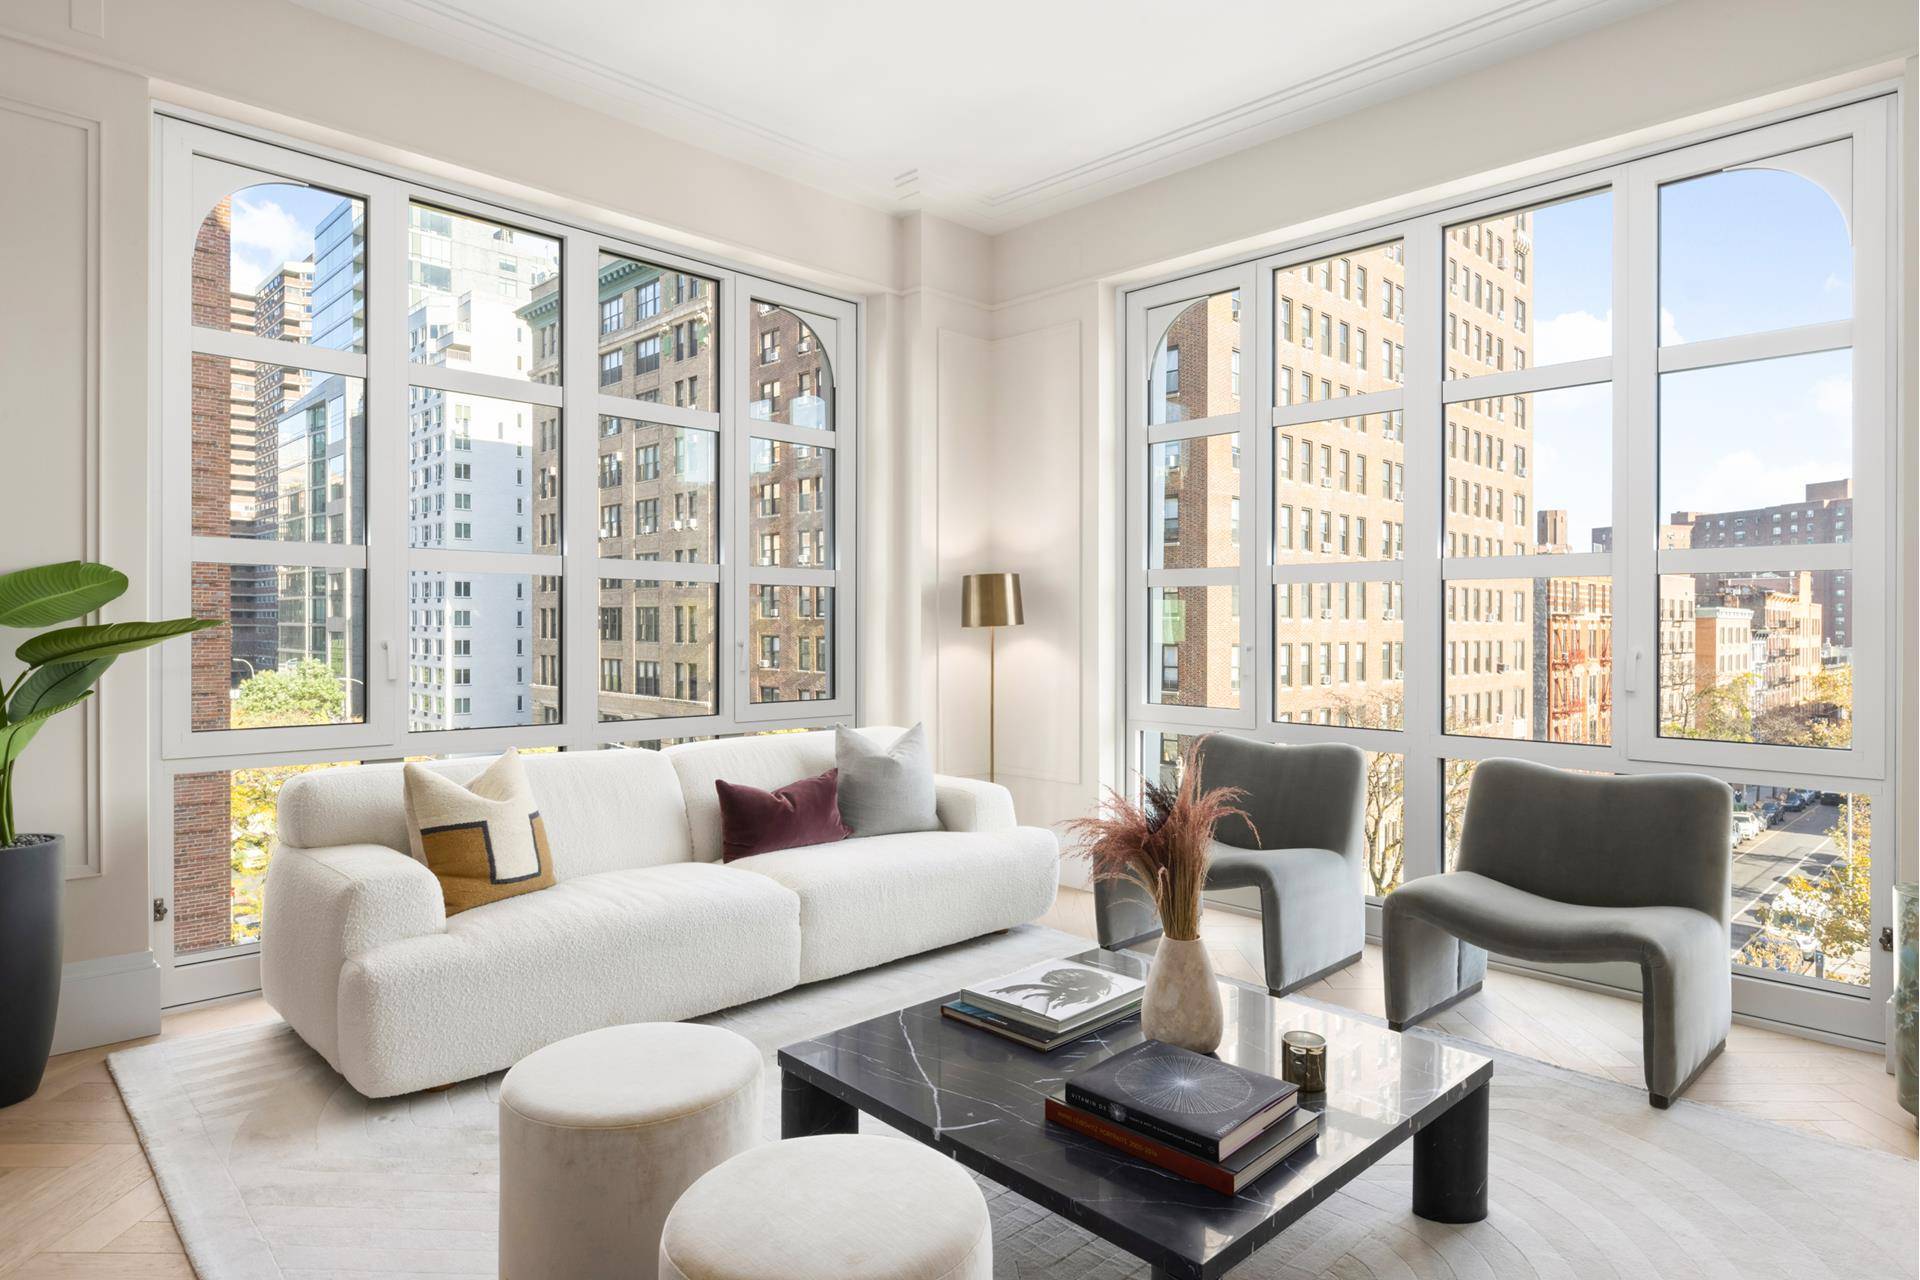 STUNNING CORNER 3 BR DESIGNED BY PARIS FORINO IMMEDIATE OCCUPANCY Residence 5A at 250 East 21st Street is a 1, 757 square foot three bedroom, two and a half bathroom ...